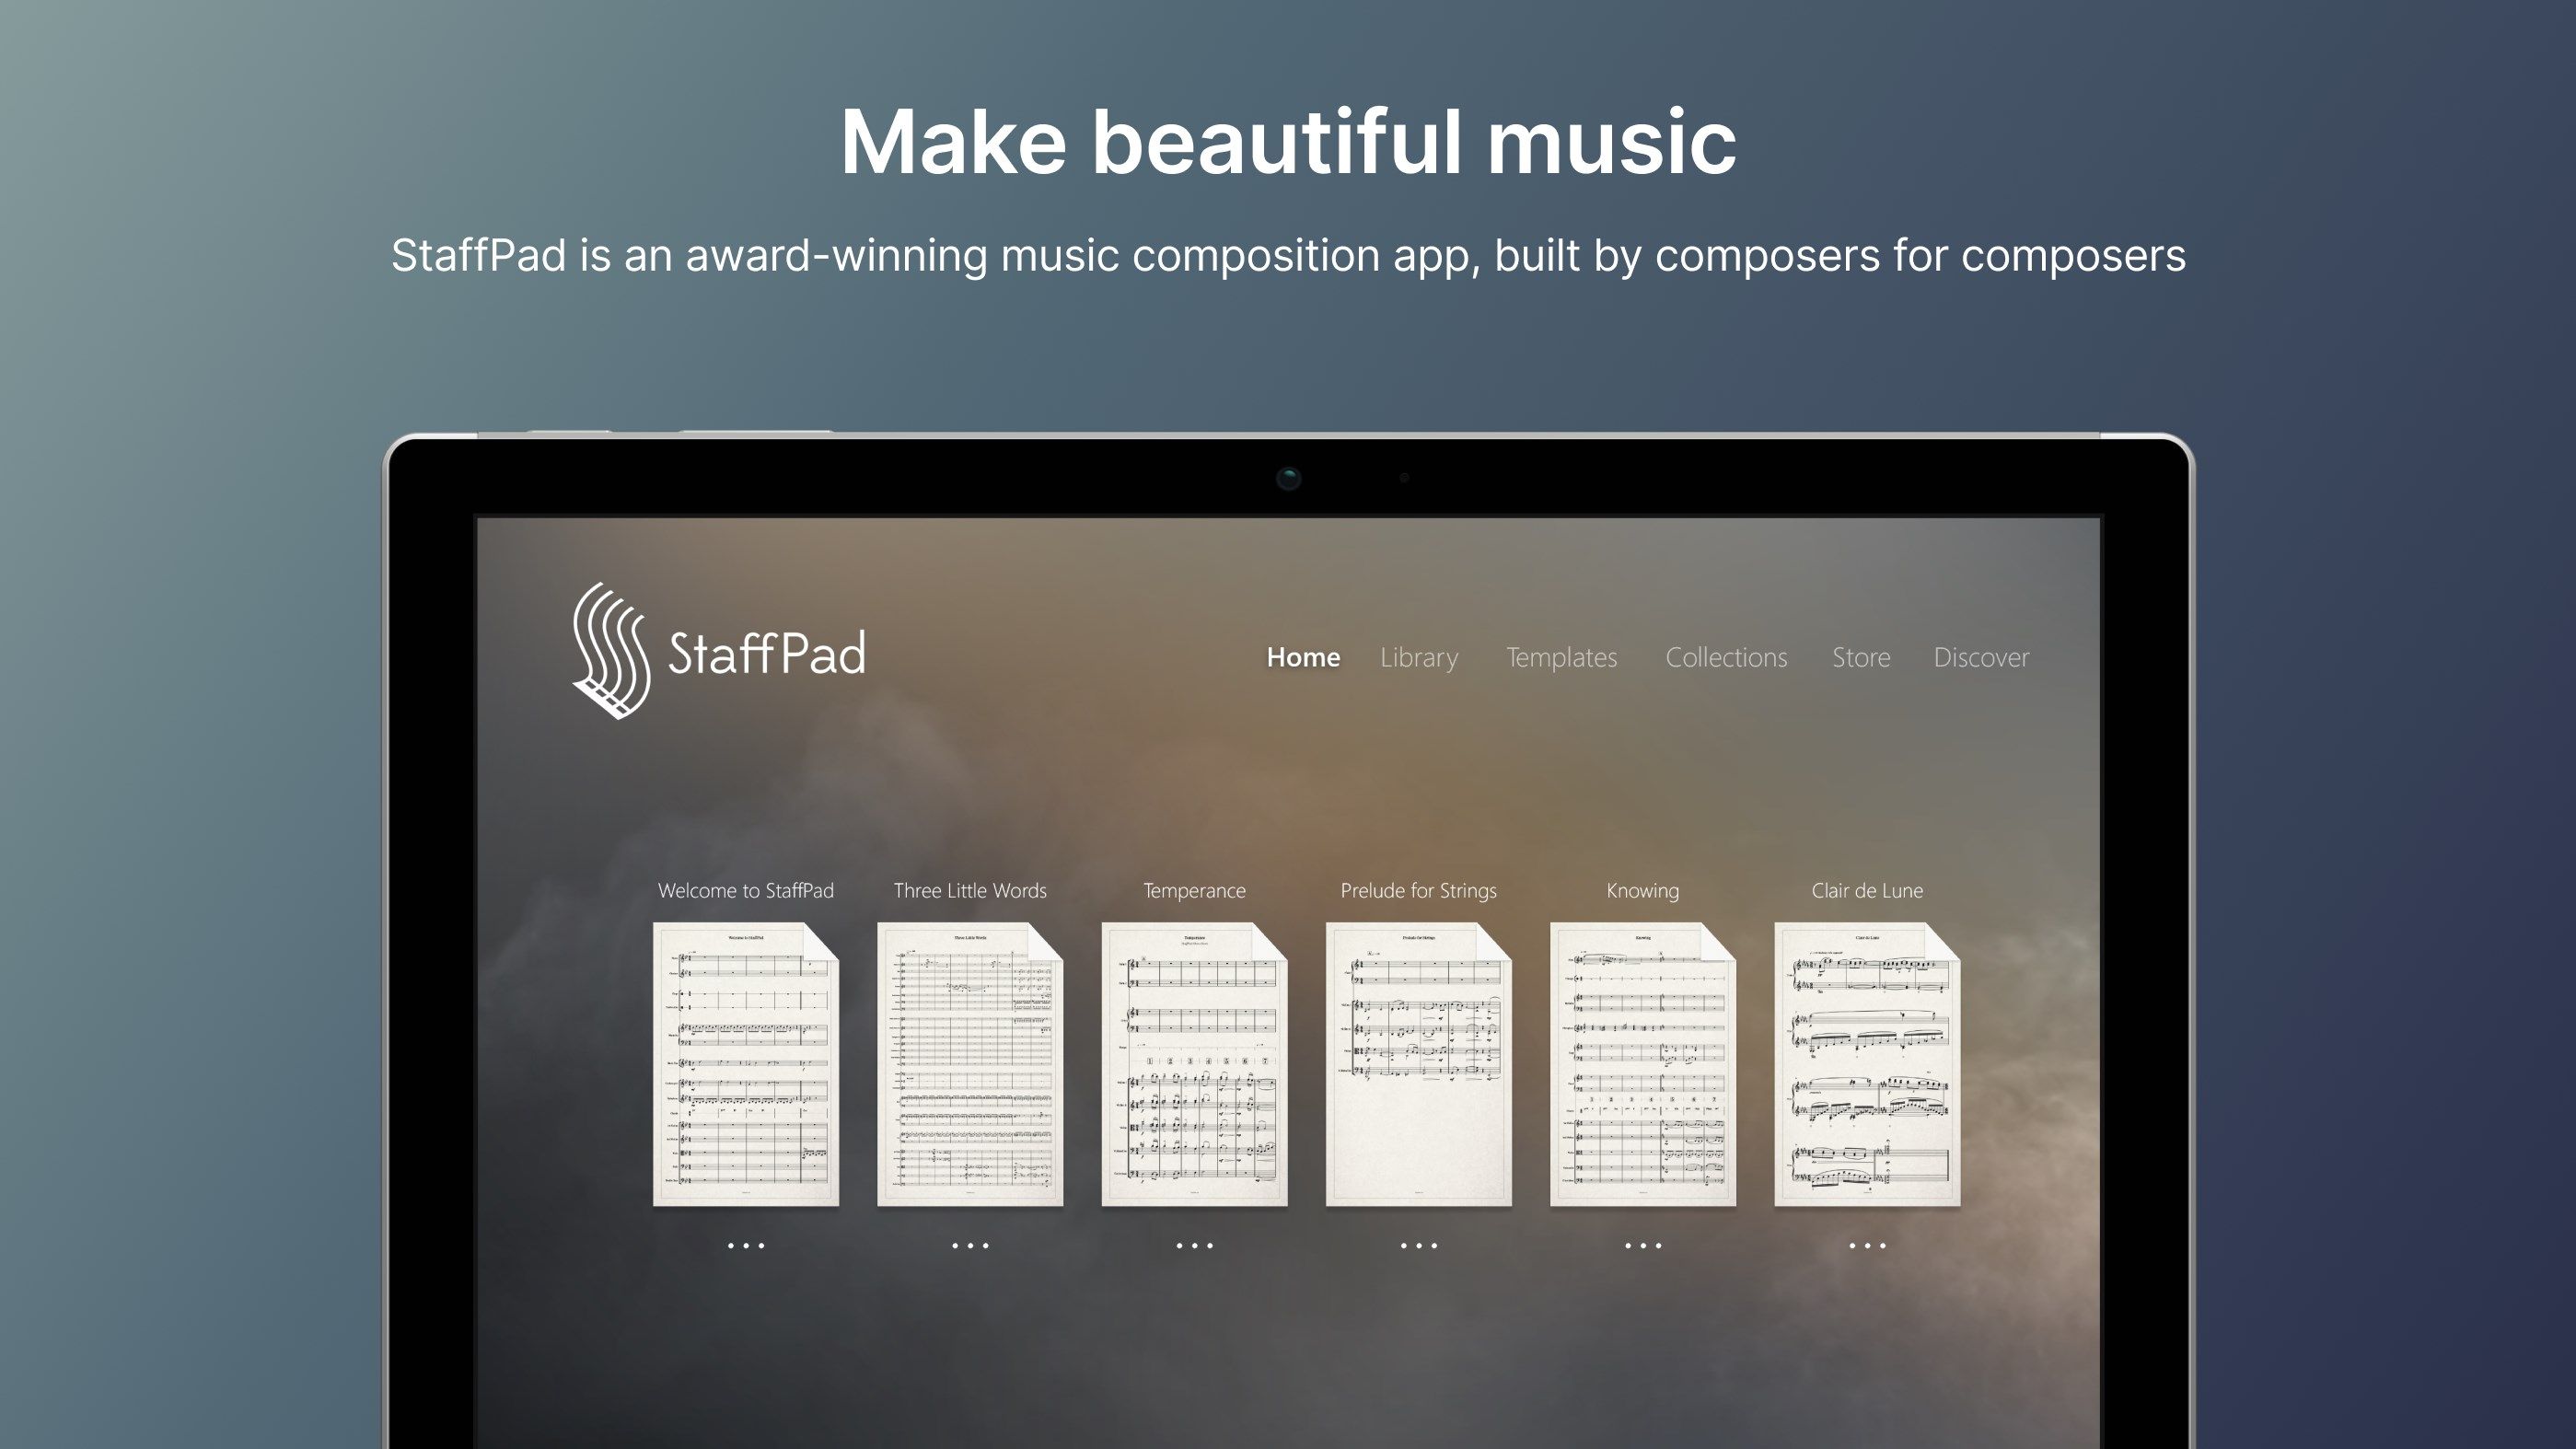 Make Beautiful Music: StaffPad is an award-winning music composition app, built by composers for composers